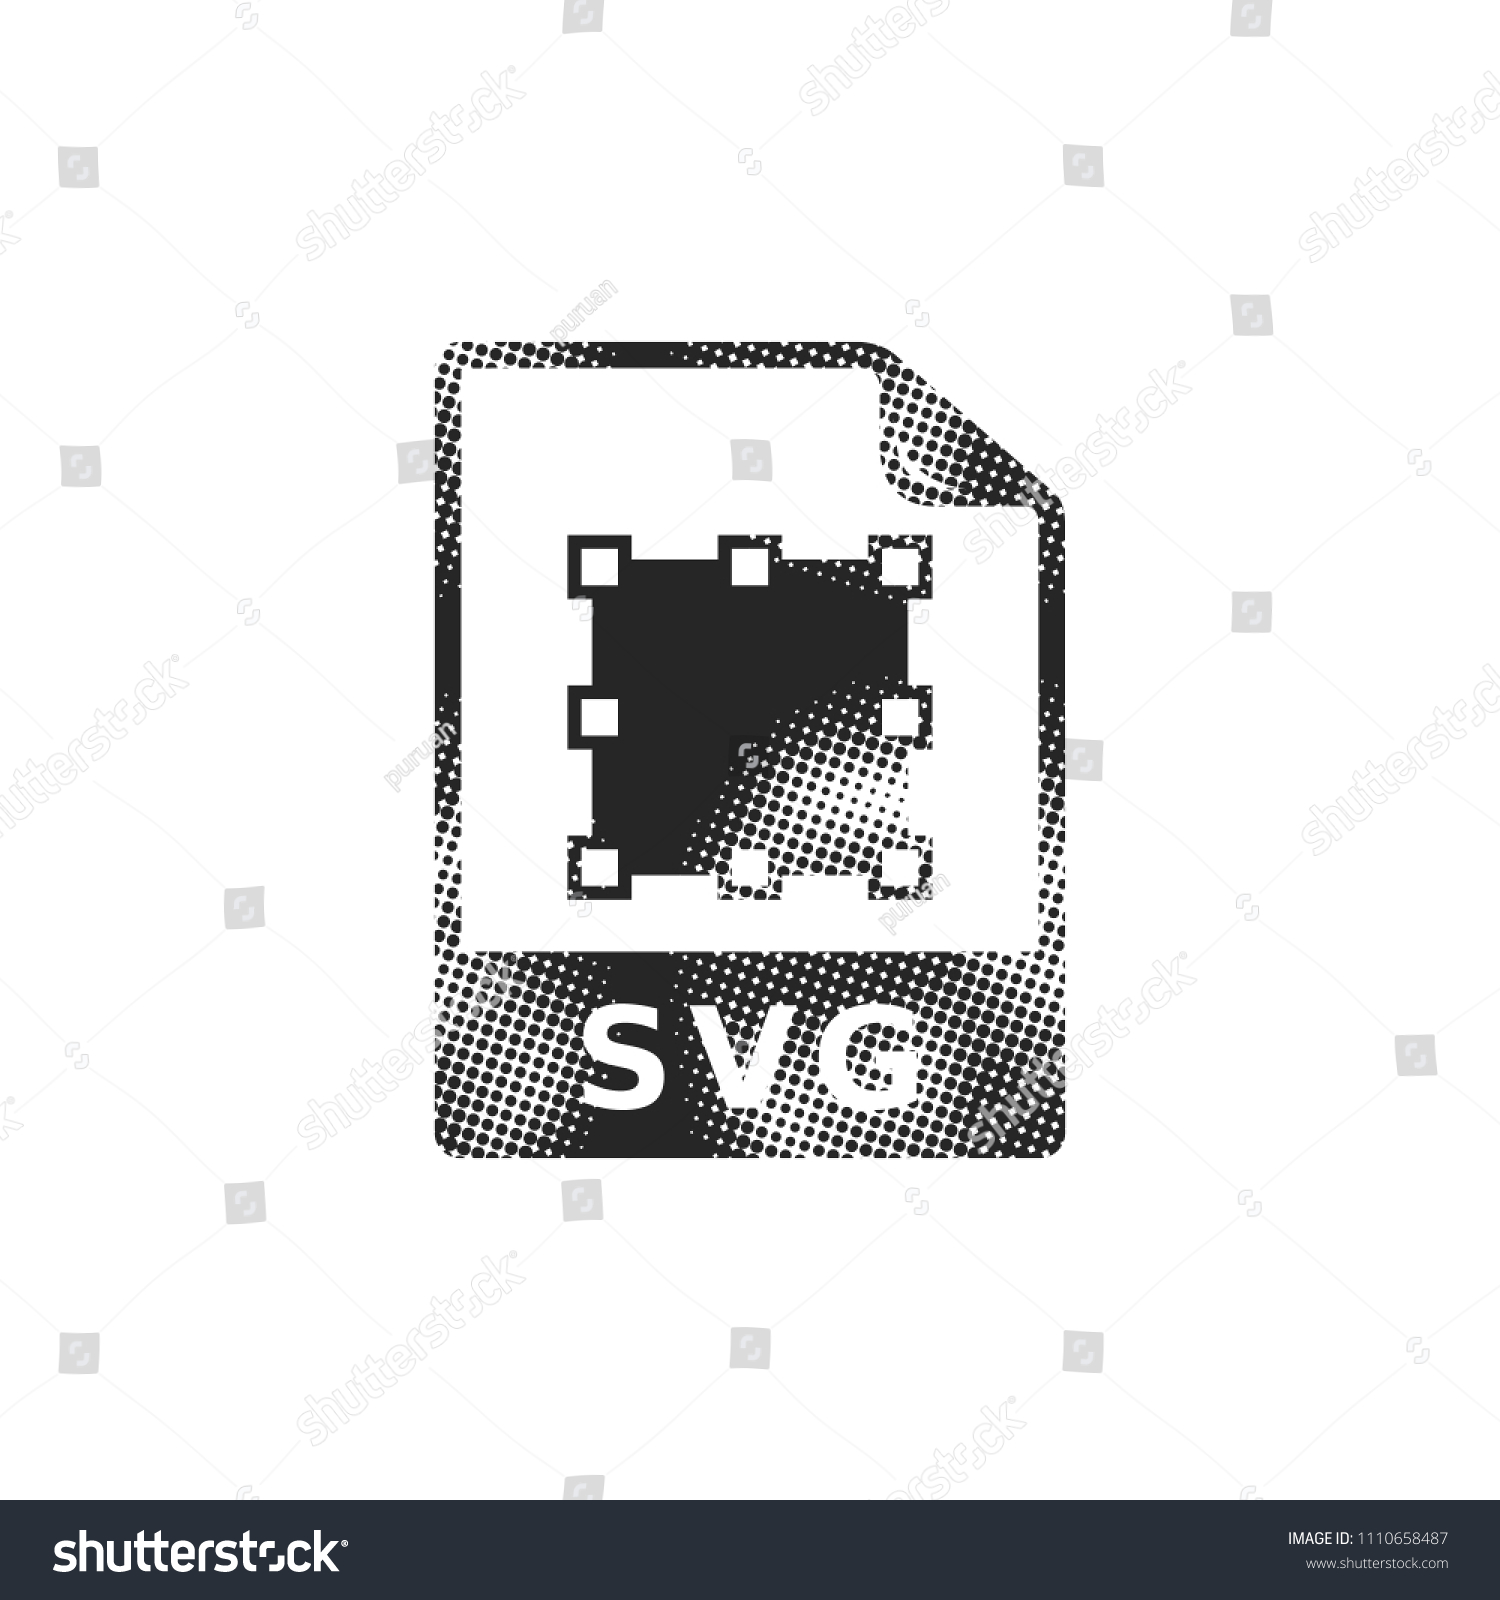 SVG of SVG file icon in halftone style. Black and white monochrome vector illustration. svg